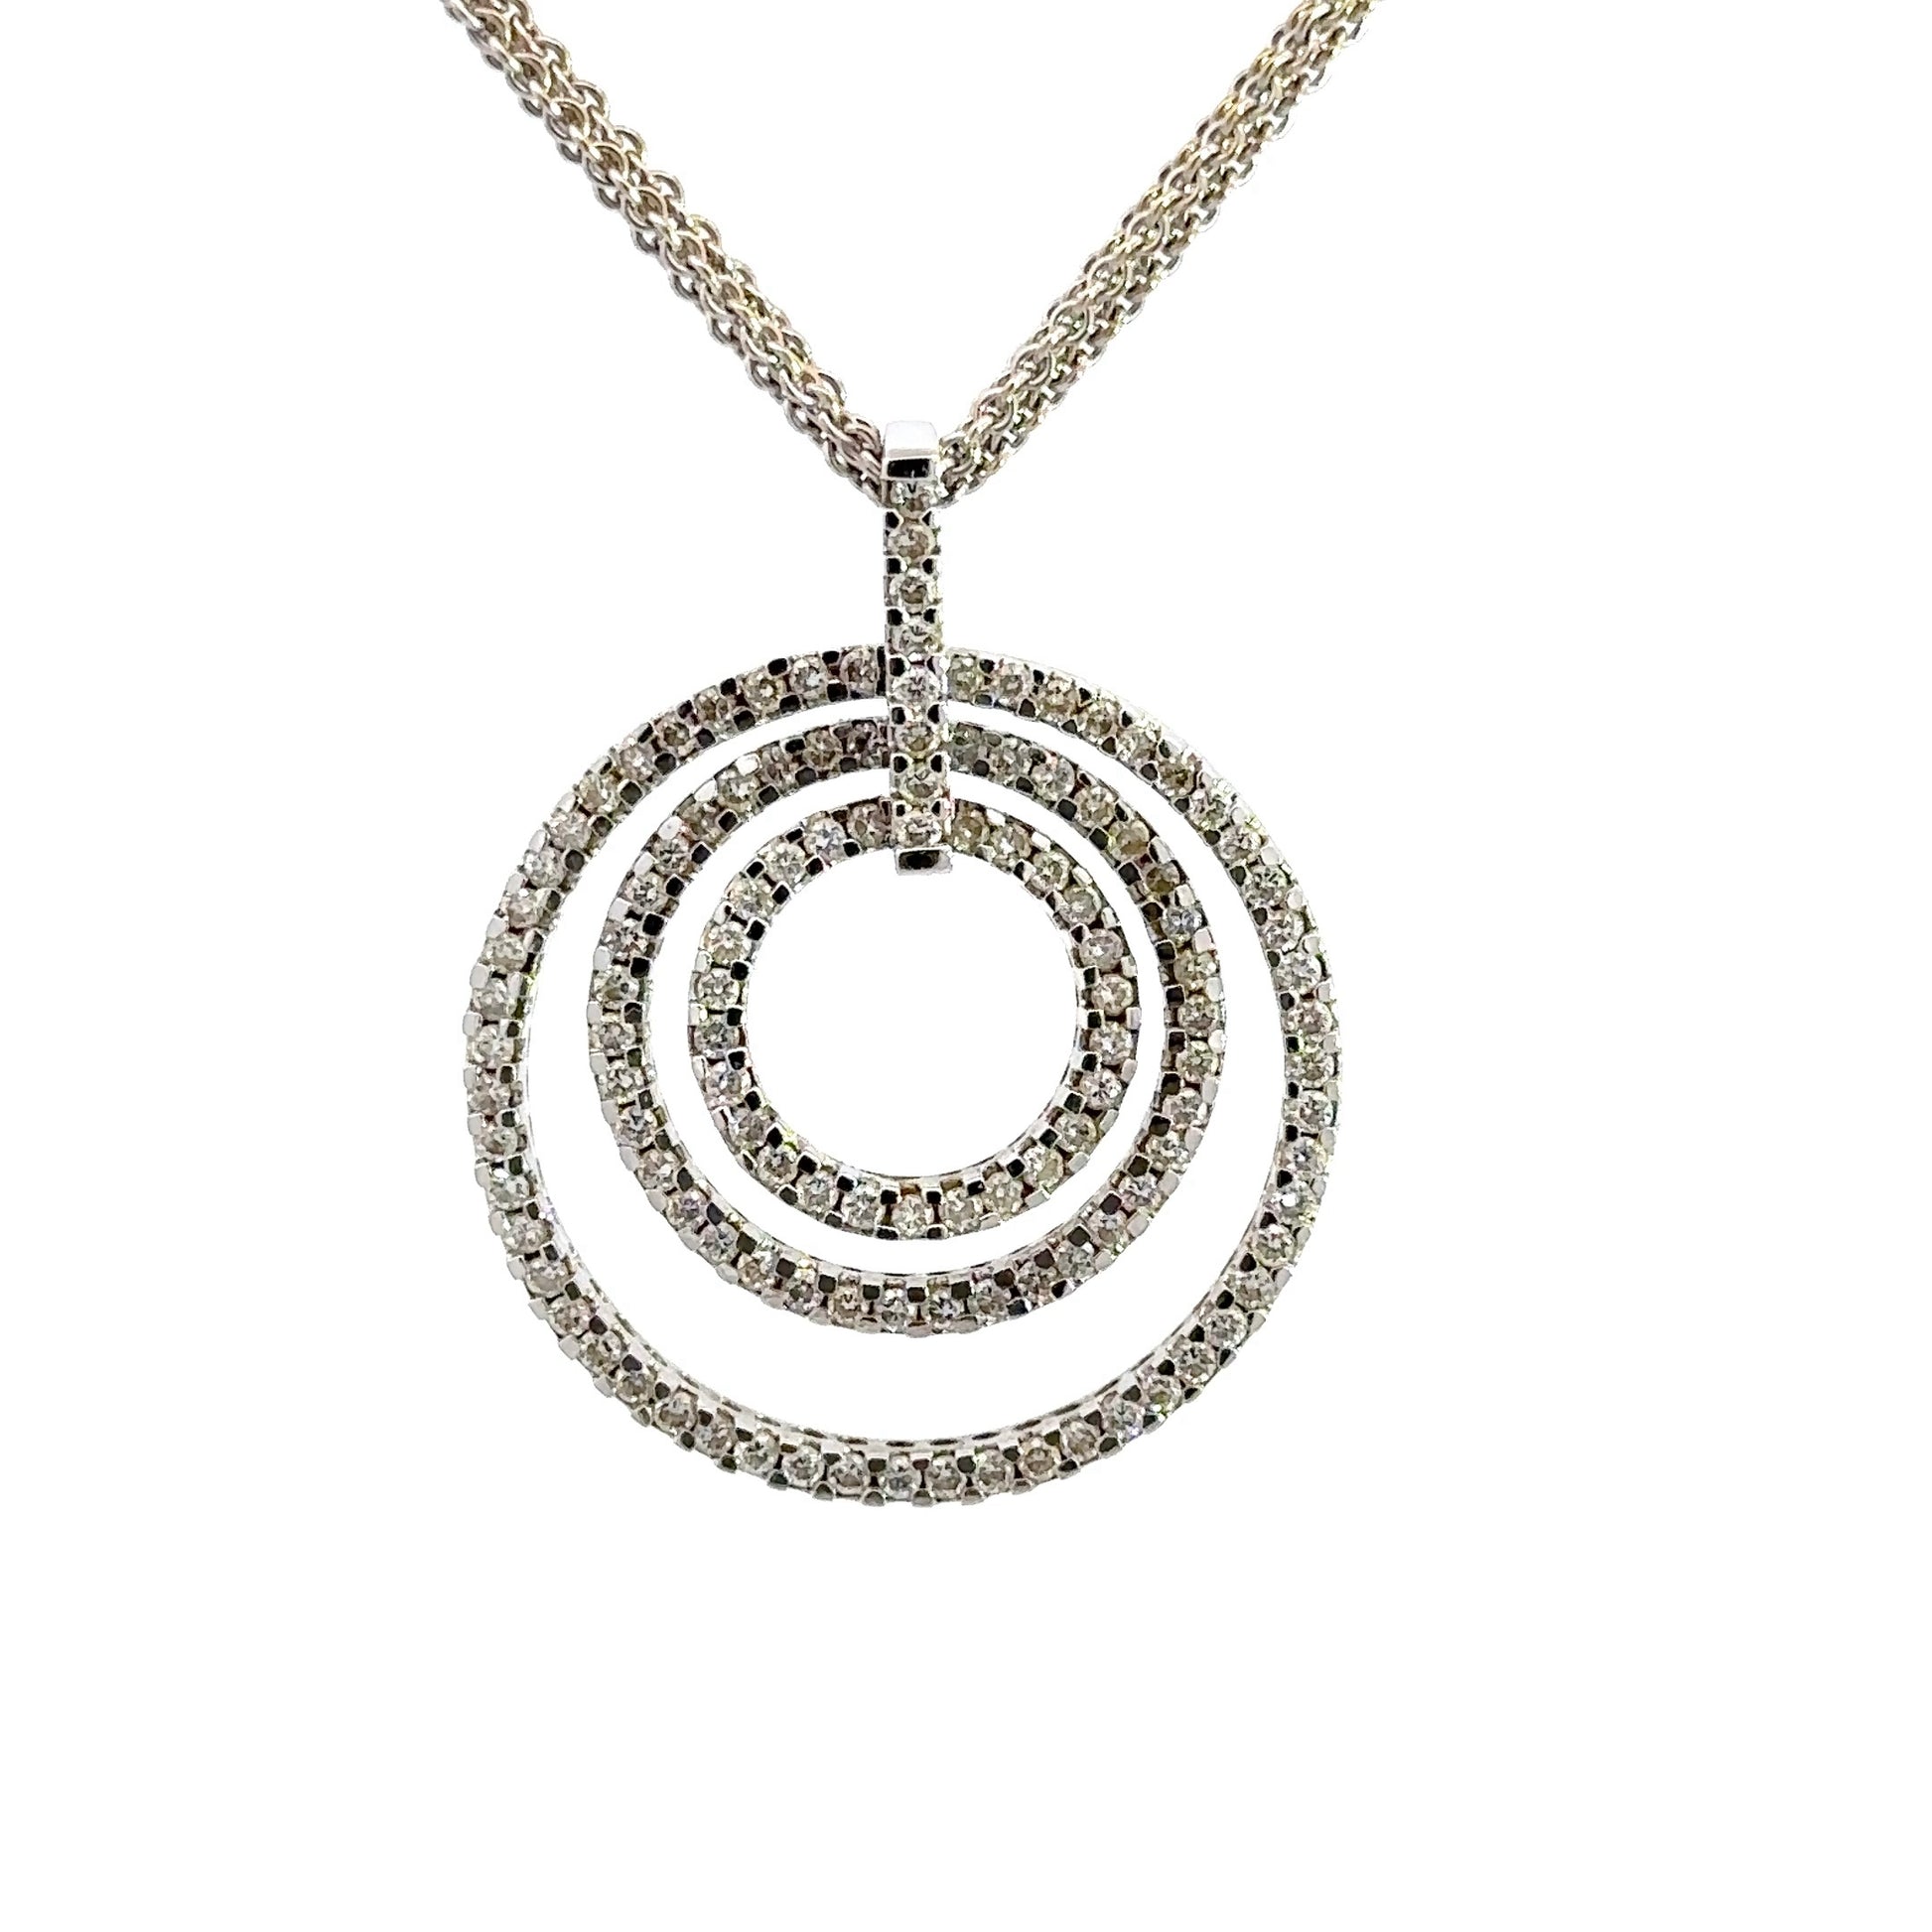 Front of 3 circle diamond necklace